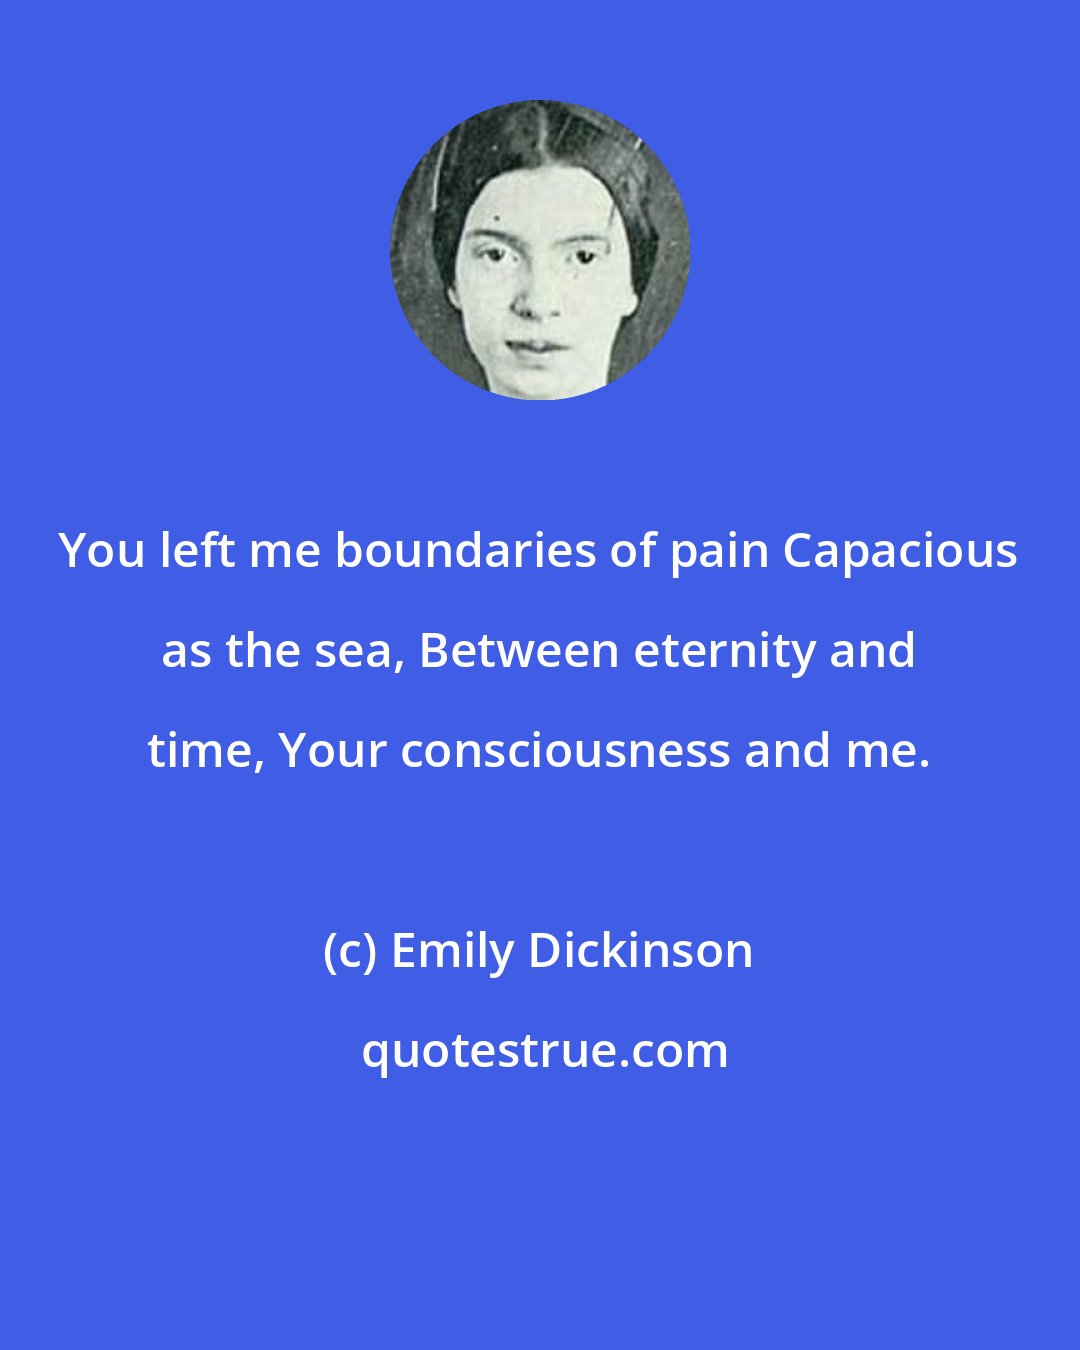 Emily Dickinson: You left me boundaries of pain Capacious as the sea, Between eternity and time, Your consciousness and me.